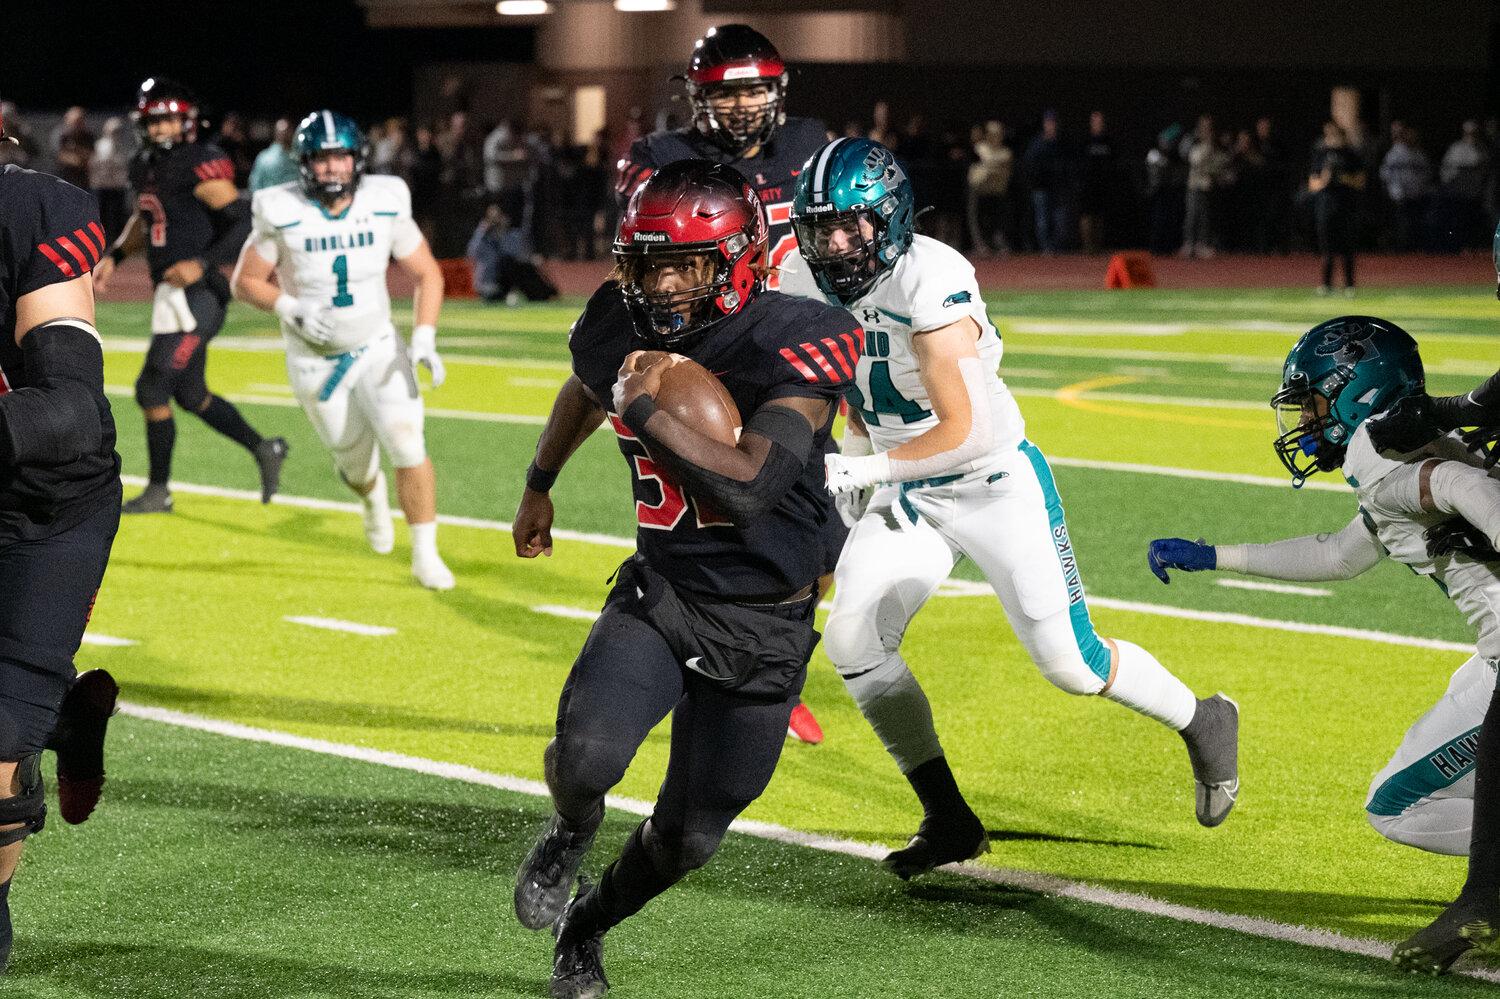 Liberty running back Jon Wilson (32) runs upfield for yardage on Saturday night against Highland. (Courtesy Picture Lady Photography for West Valley Preps)